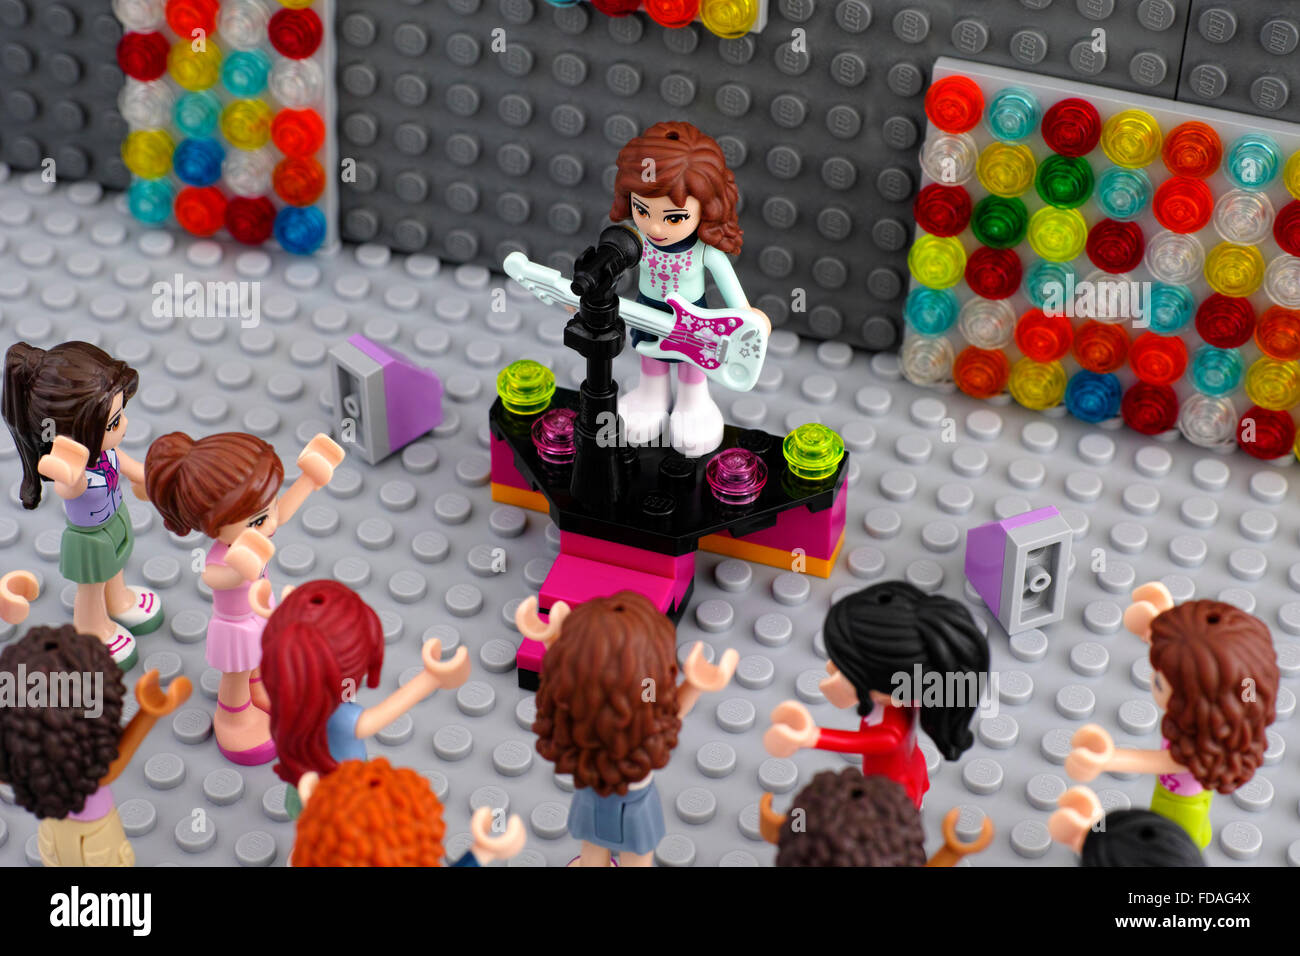 Lego concert with musician and audience. Lego friends girl minifigure with  electric guitar on the stage with microphone Stock Photo - Alamy